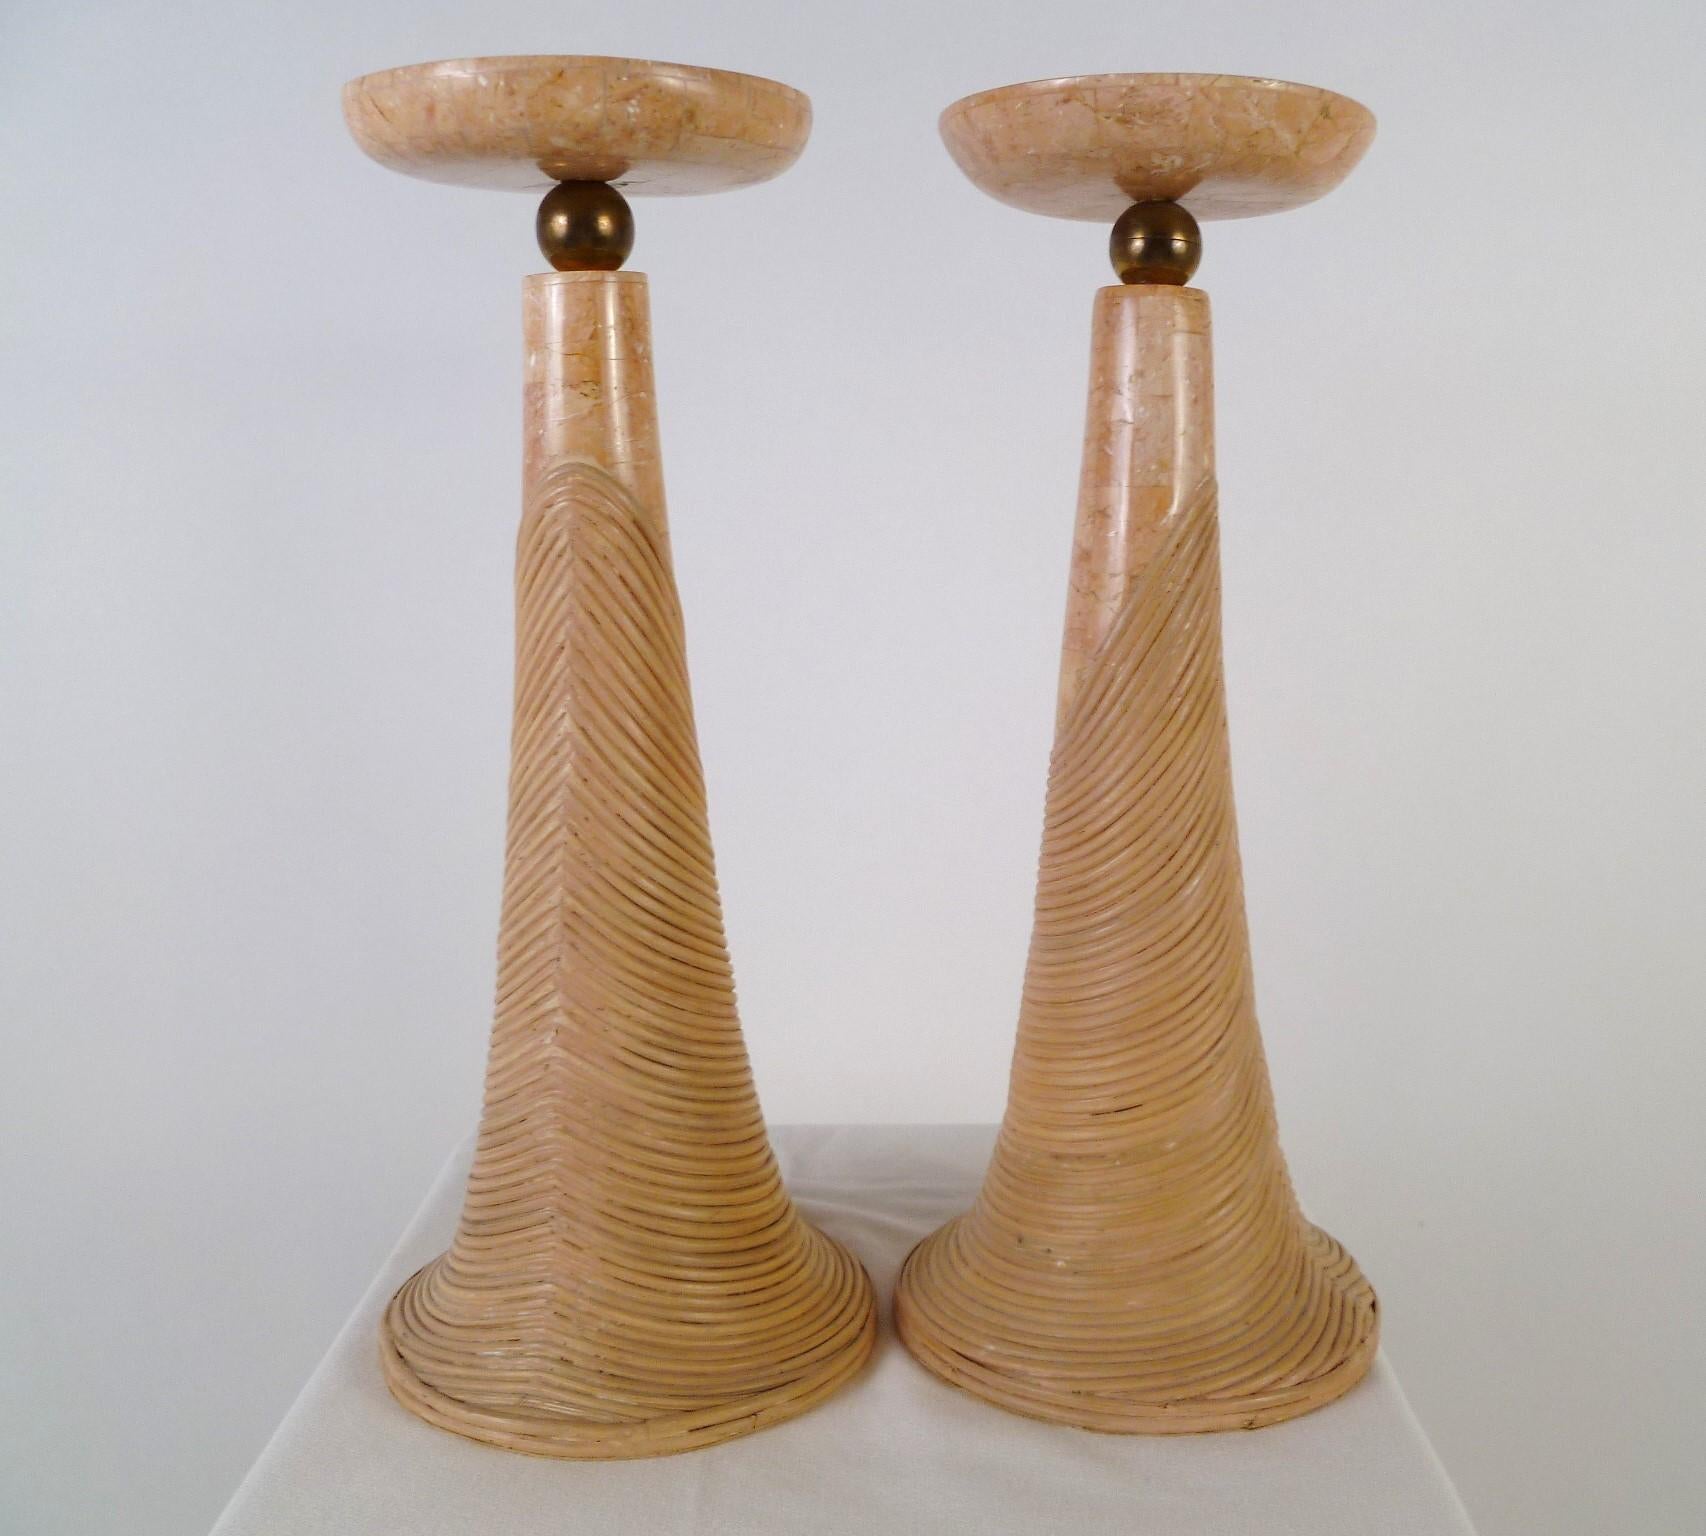 Karl Springer Style Pair Tessellated Marble, Brass and Cane Candleholders 1970s In Good Condition For Sale In Miami, FL